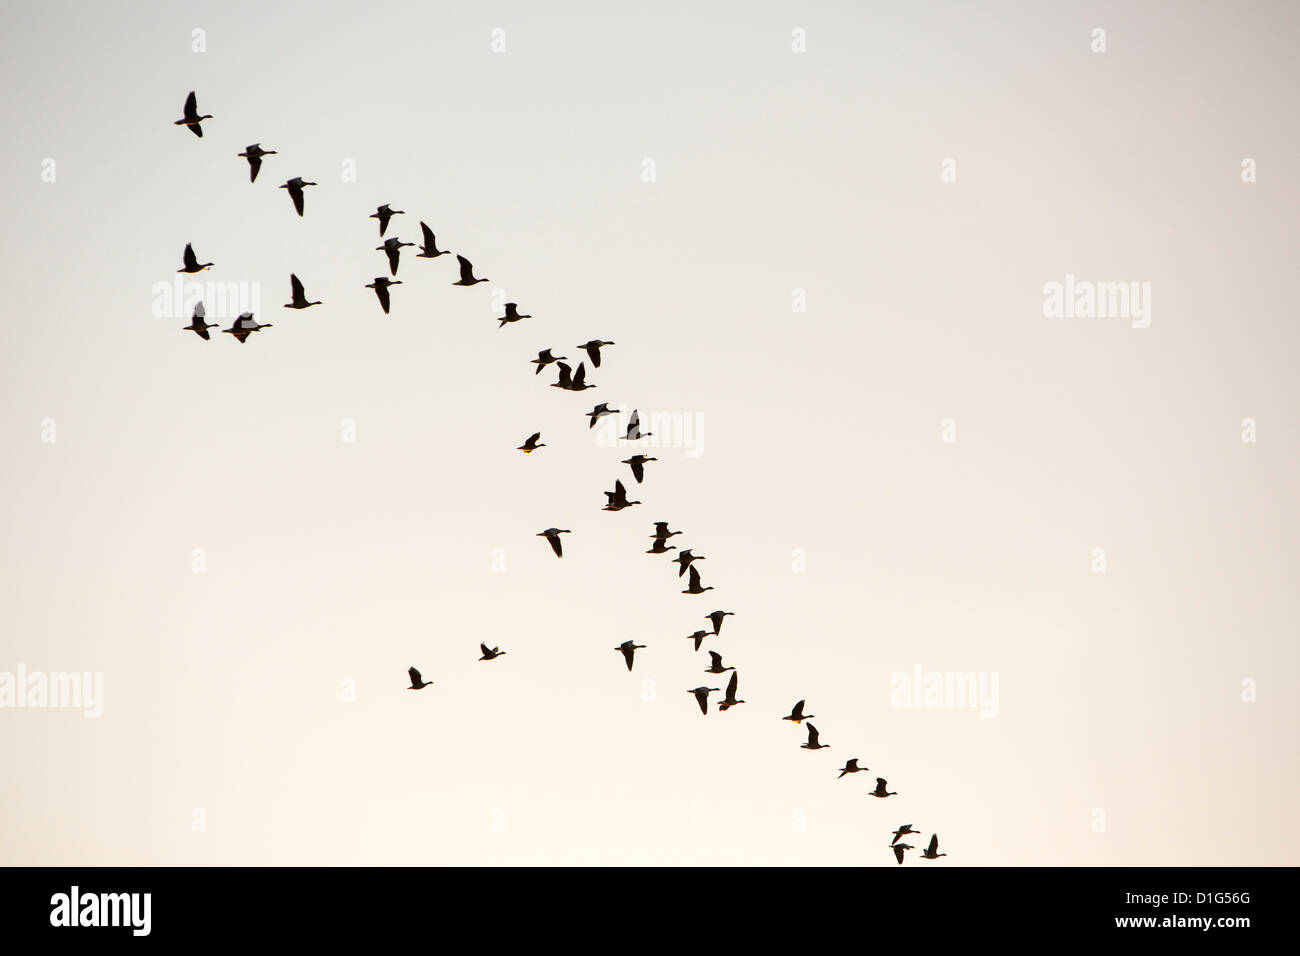 A skein of Barnacle Geese (Branta leucopsis) over Caelaverock on the Solway Firth in Scotland, UK Stock Photo